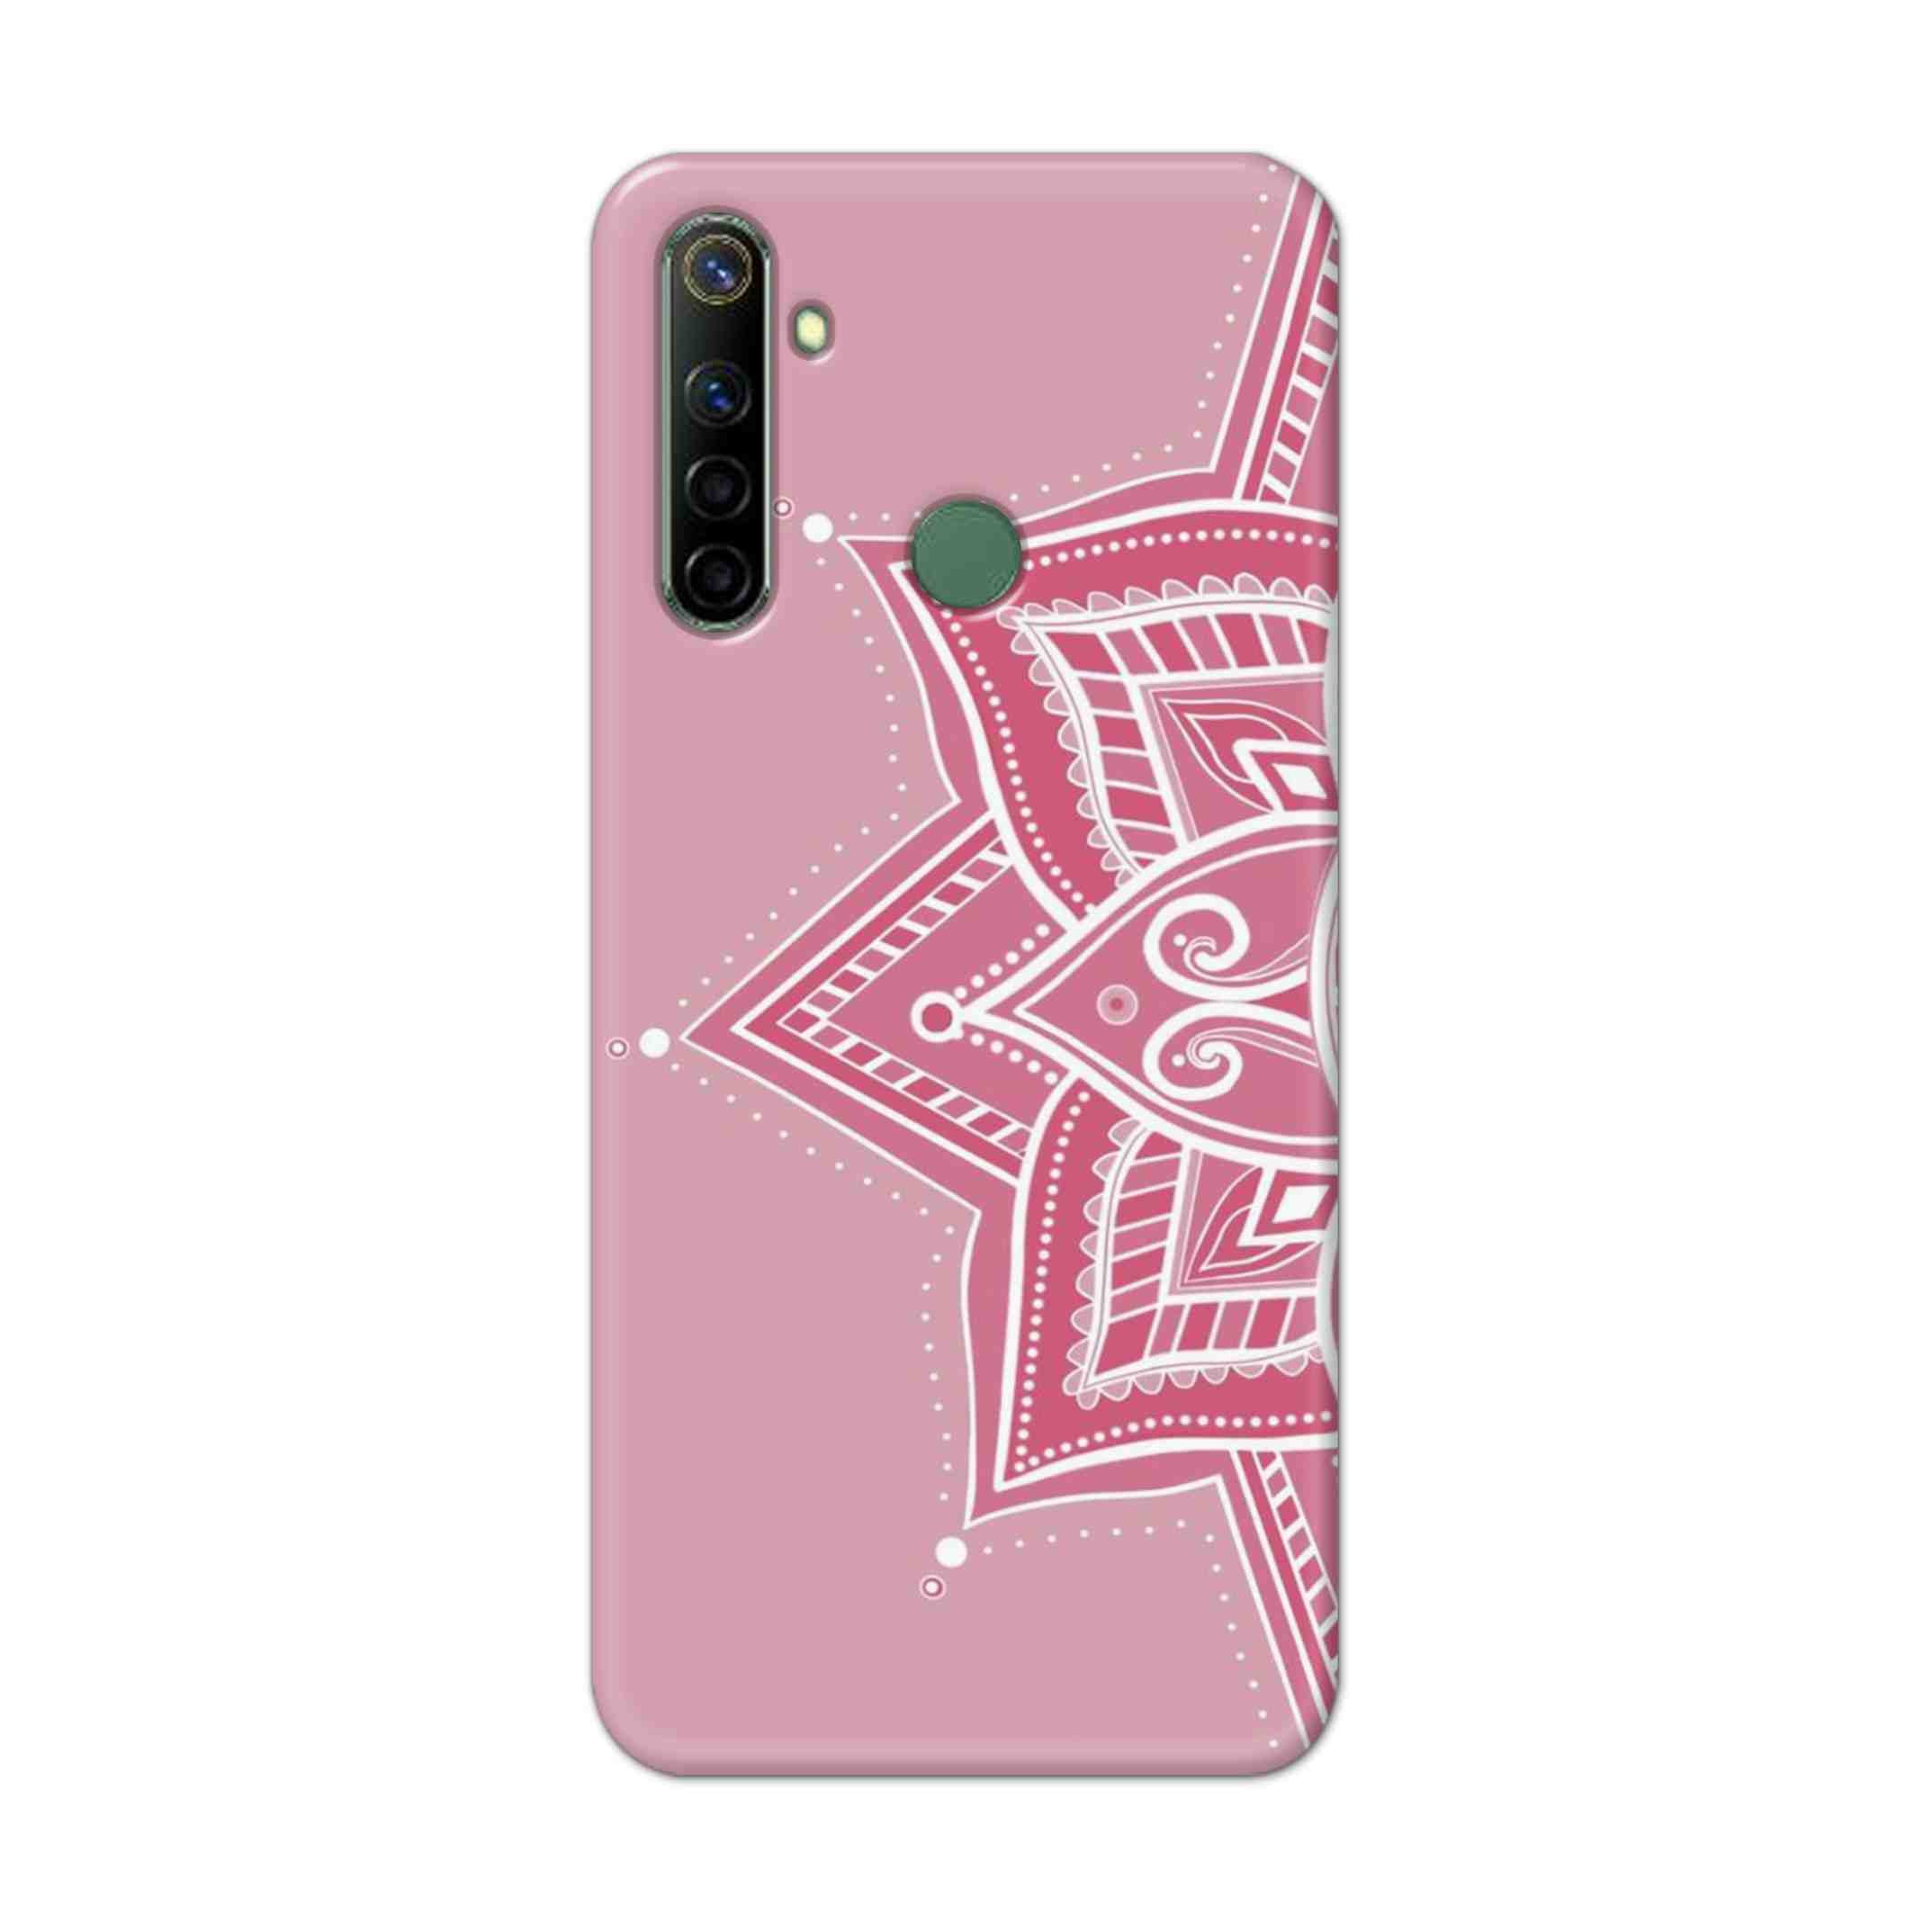 Buy Pink Rangoli Hard Back Mobile Phone Case Cover For Realme Narzo 10a Online